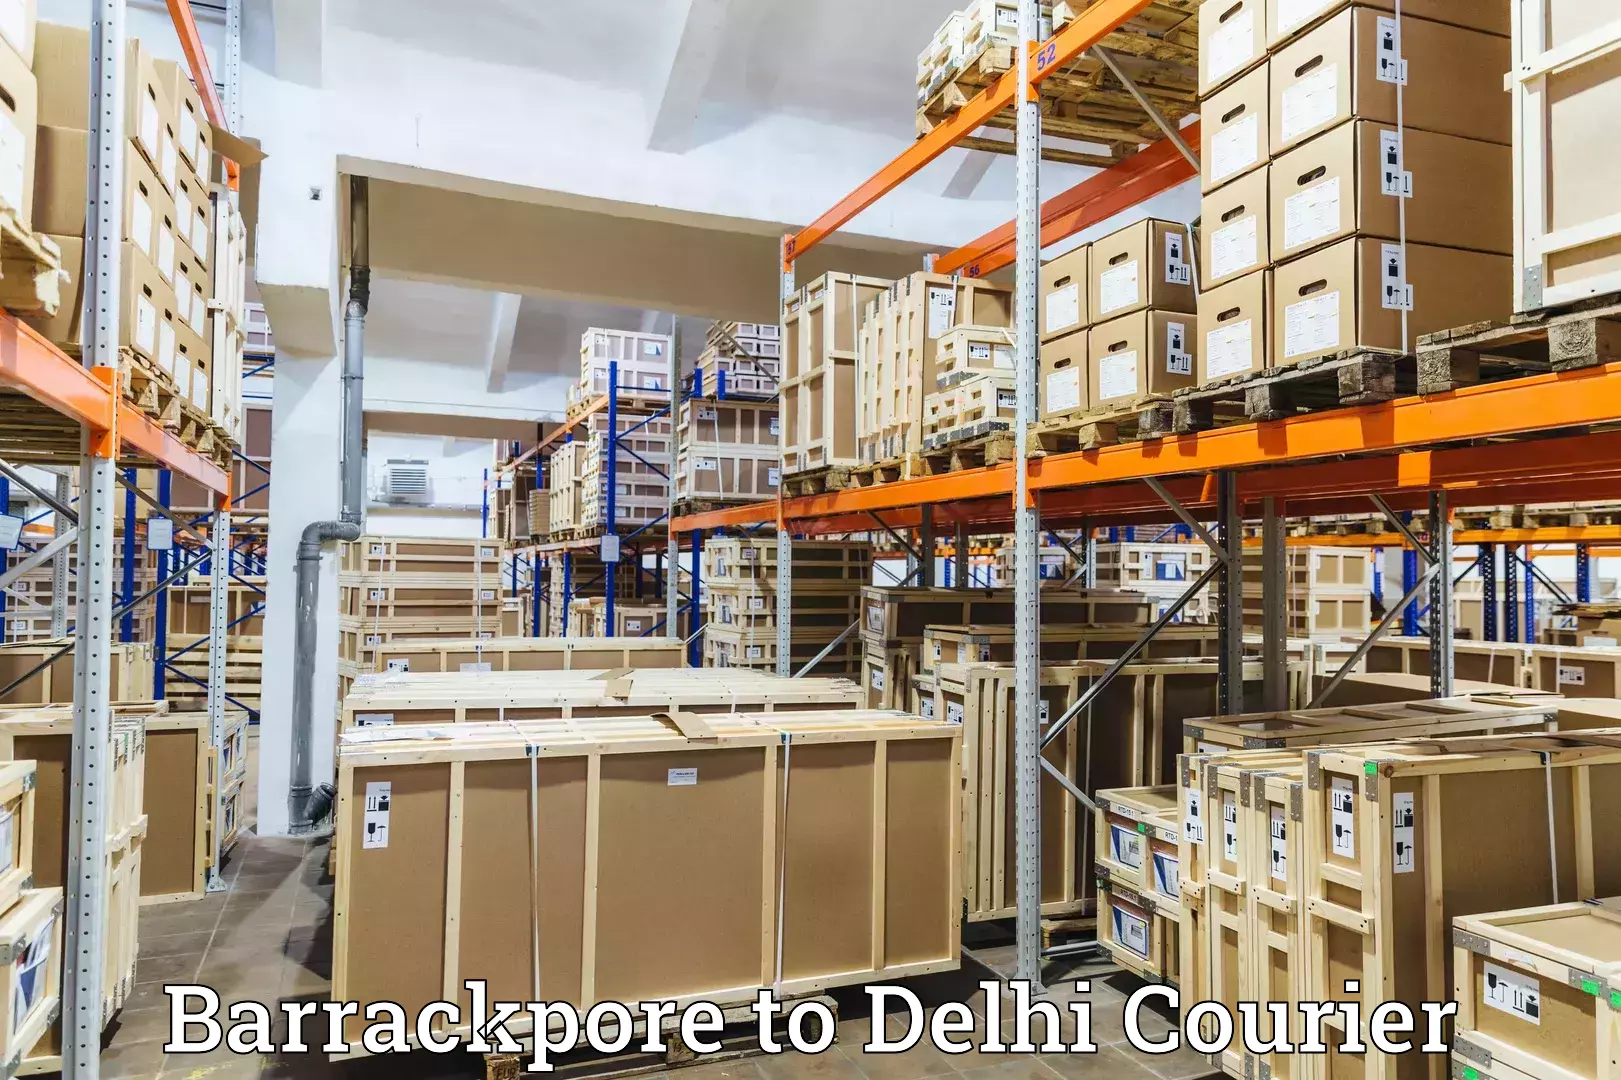 Package delivery network Barrackpore to Delhi